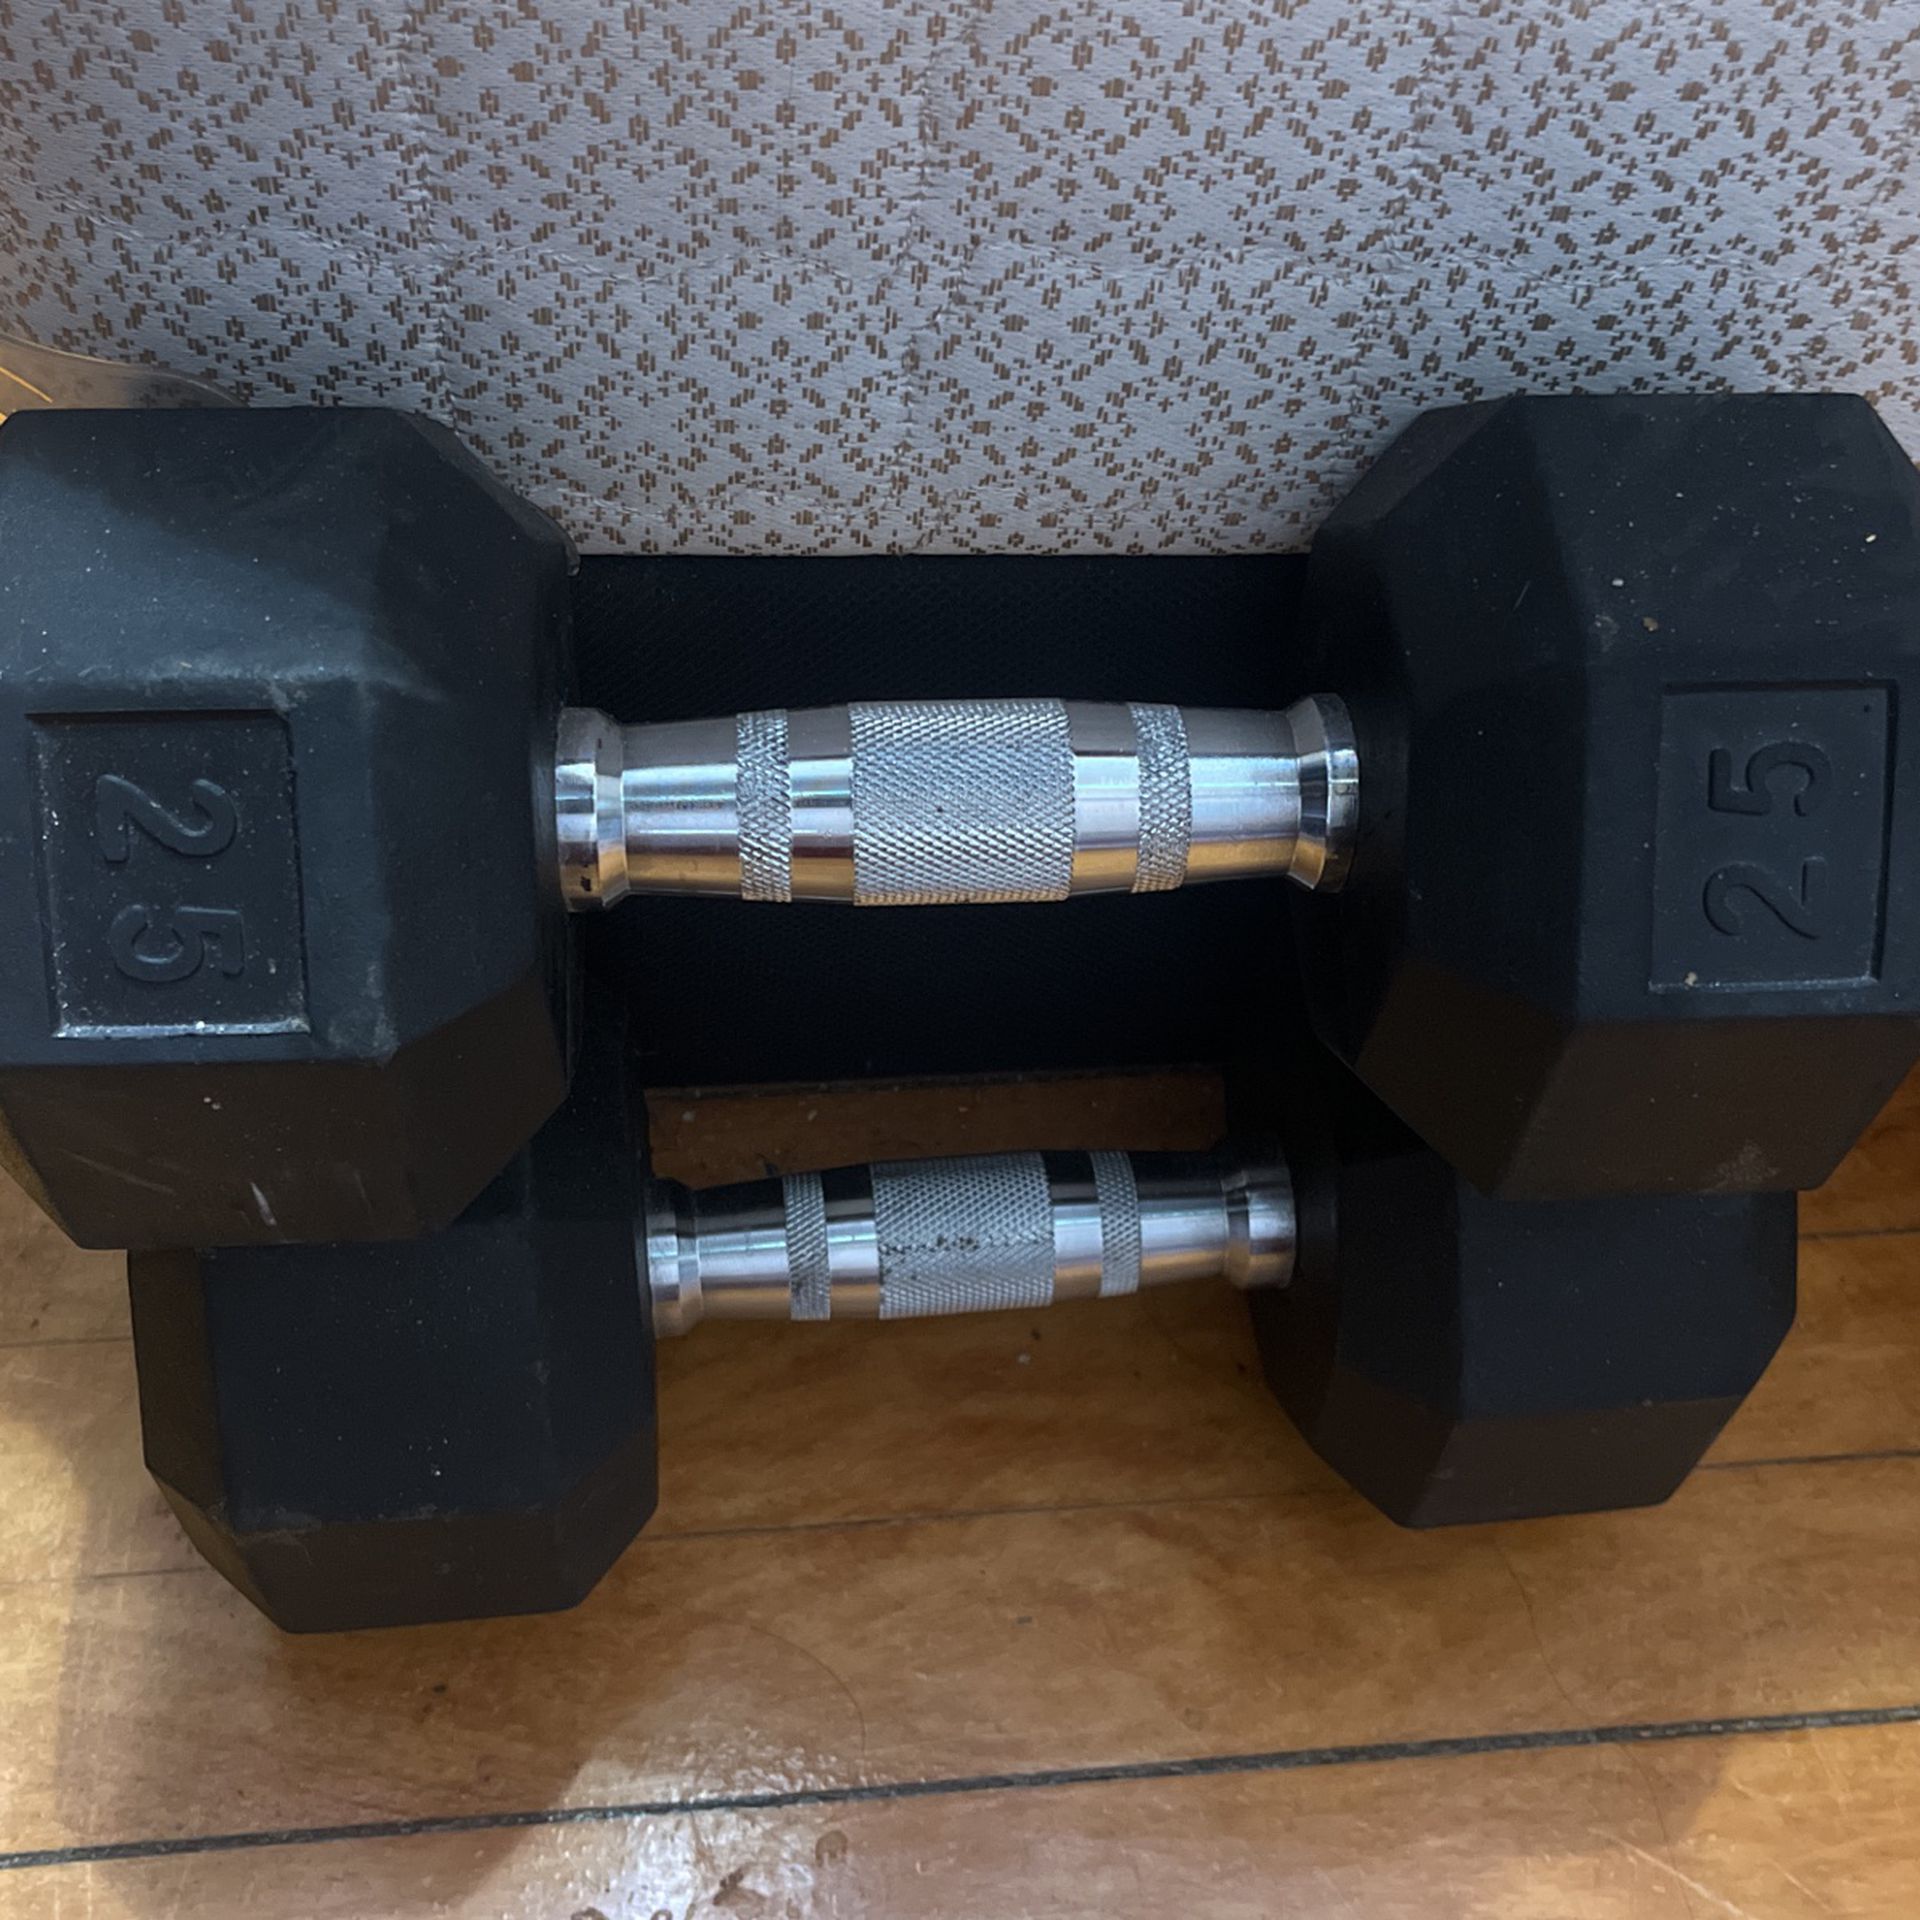 Two 25 pound weights for $35